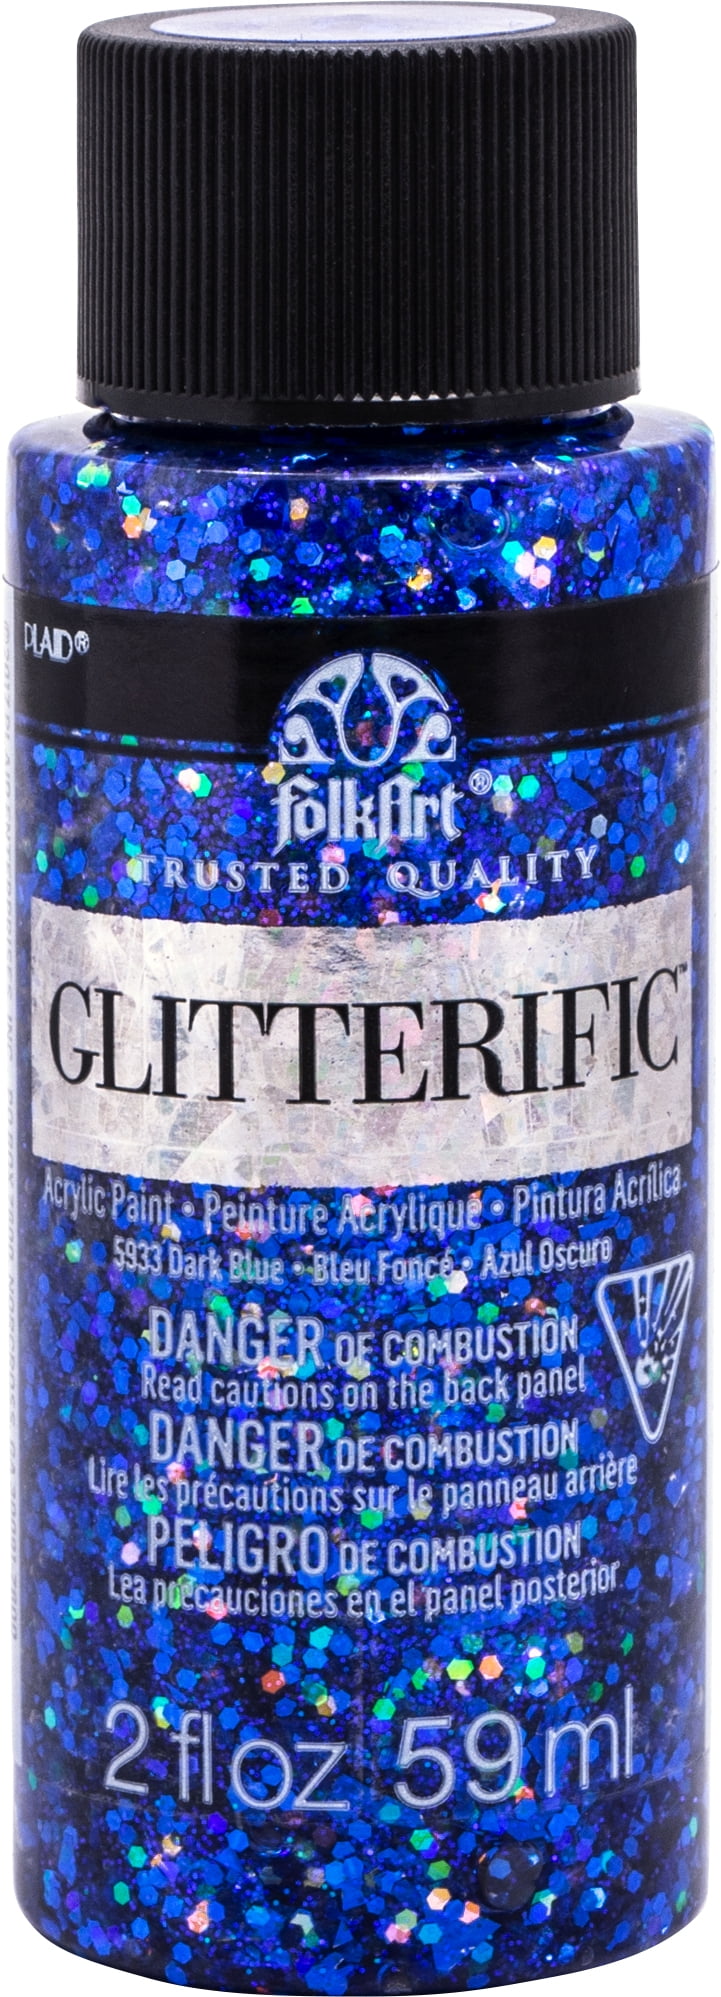 FolkArt Glitterific Pop Acrylic Craft Paint, Black Ice 2 fl oz Premium  Glitter Finish Paint, Perfect For Easy To Apply DIY Arts And Crafts, 12004